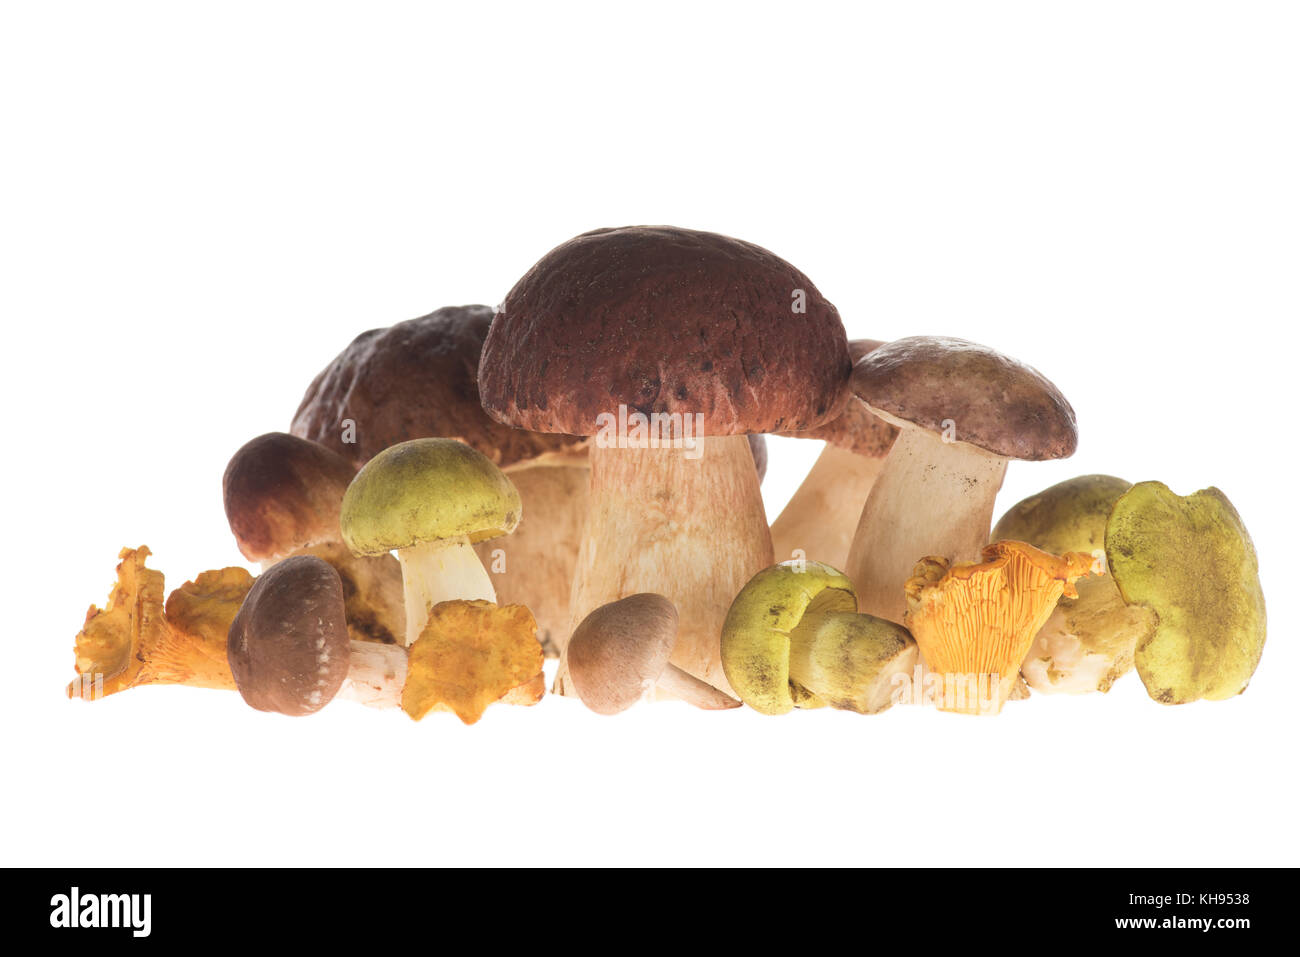 Pile of Different types of mushrooms Stock Photo